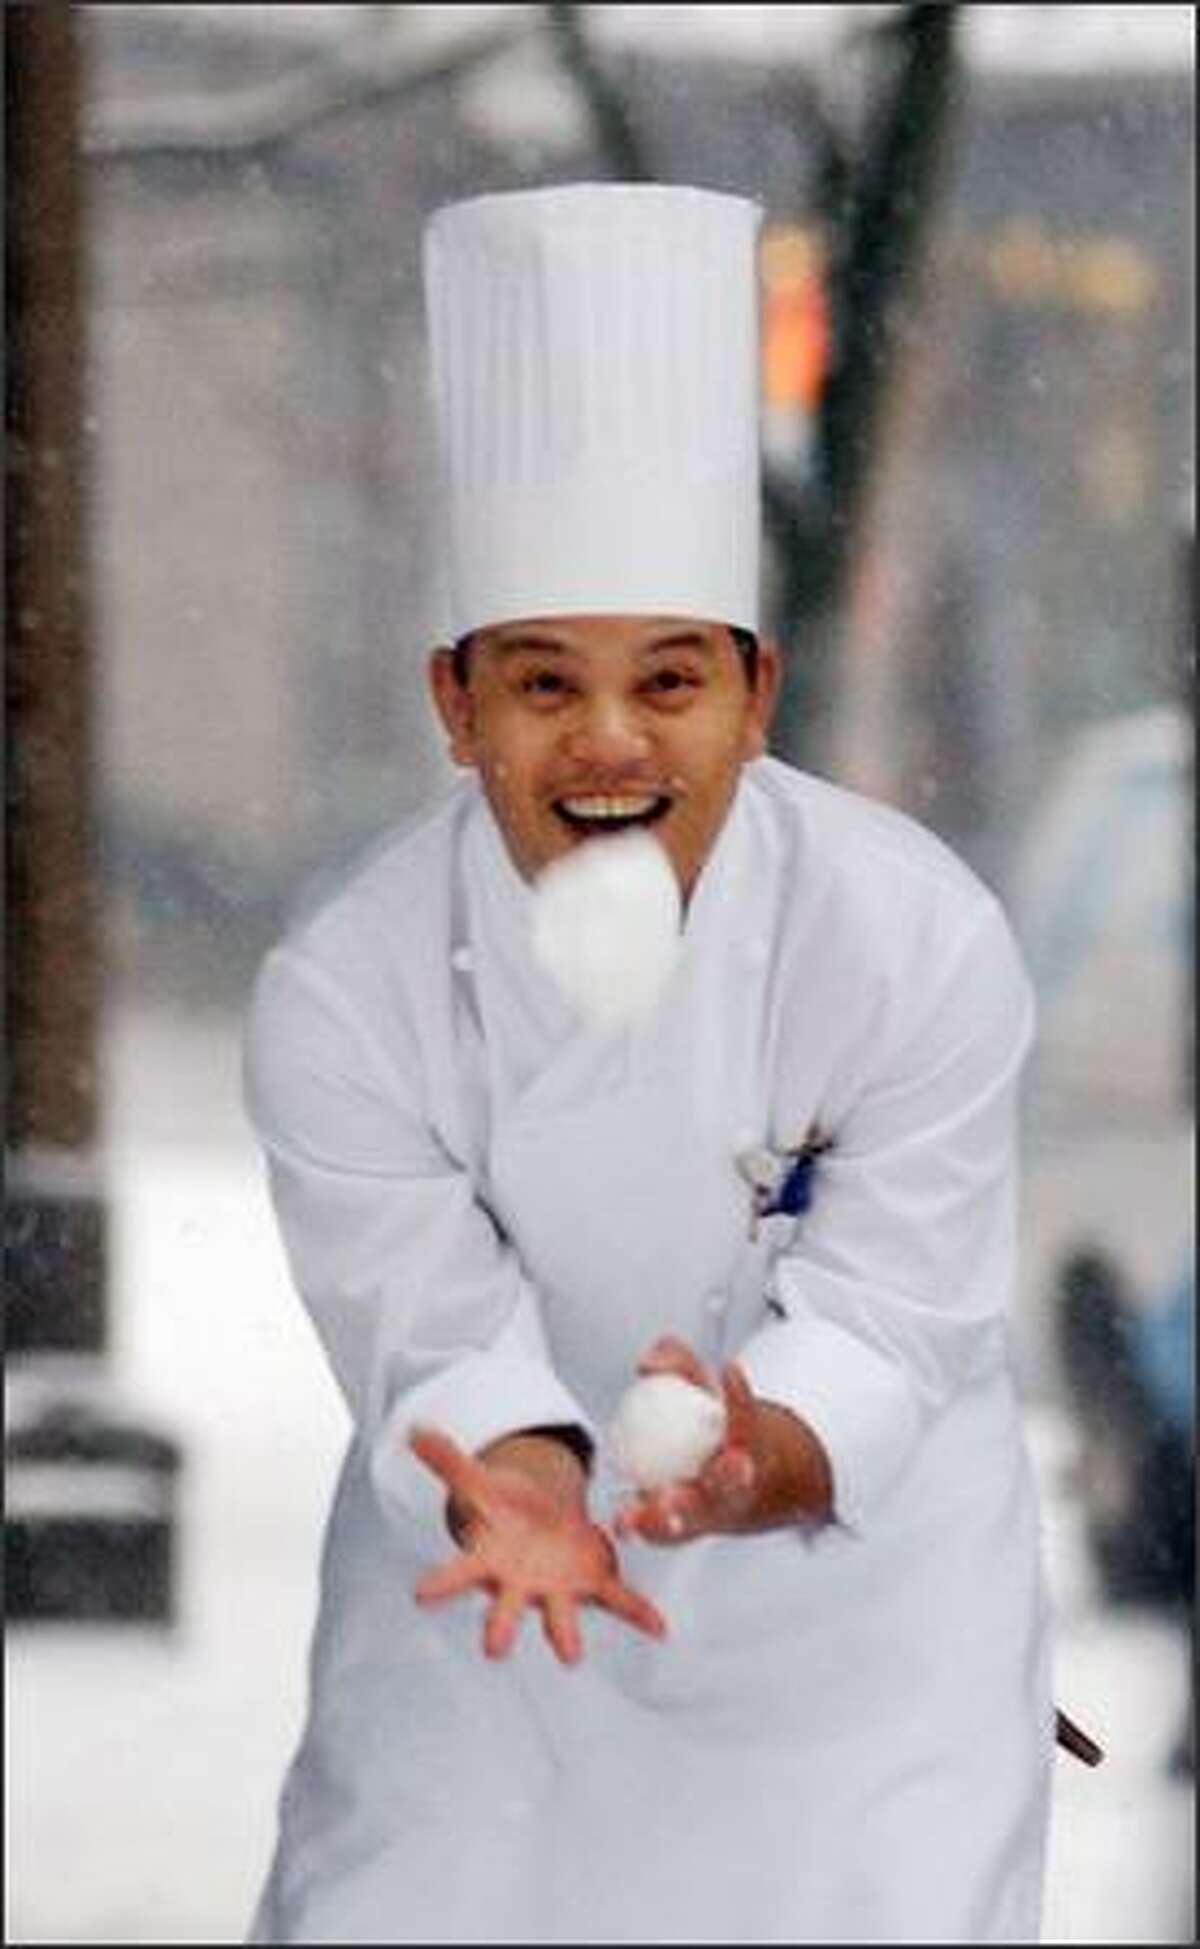 Chef Leo Bonilla tries to catch a snowball thrown at him by a co-worker at the downtown Seattle Sheraton hotel Tuesday morning. The snow closed schools and persuaded many commuters to stay home. (AP Photo/Elaine Thompson)